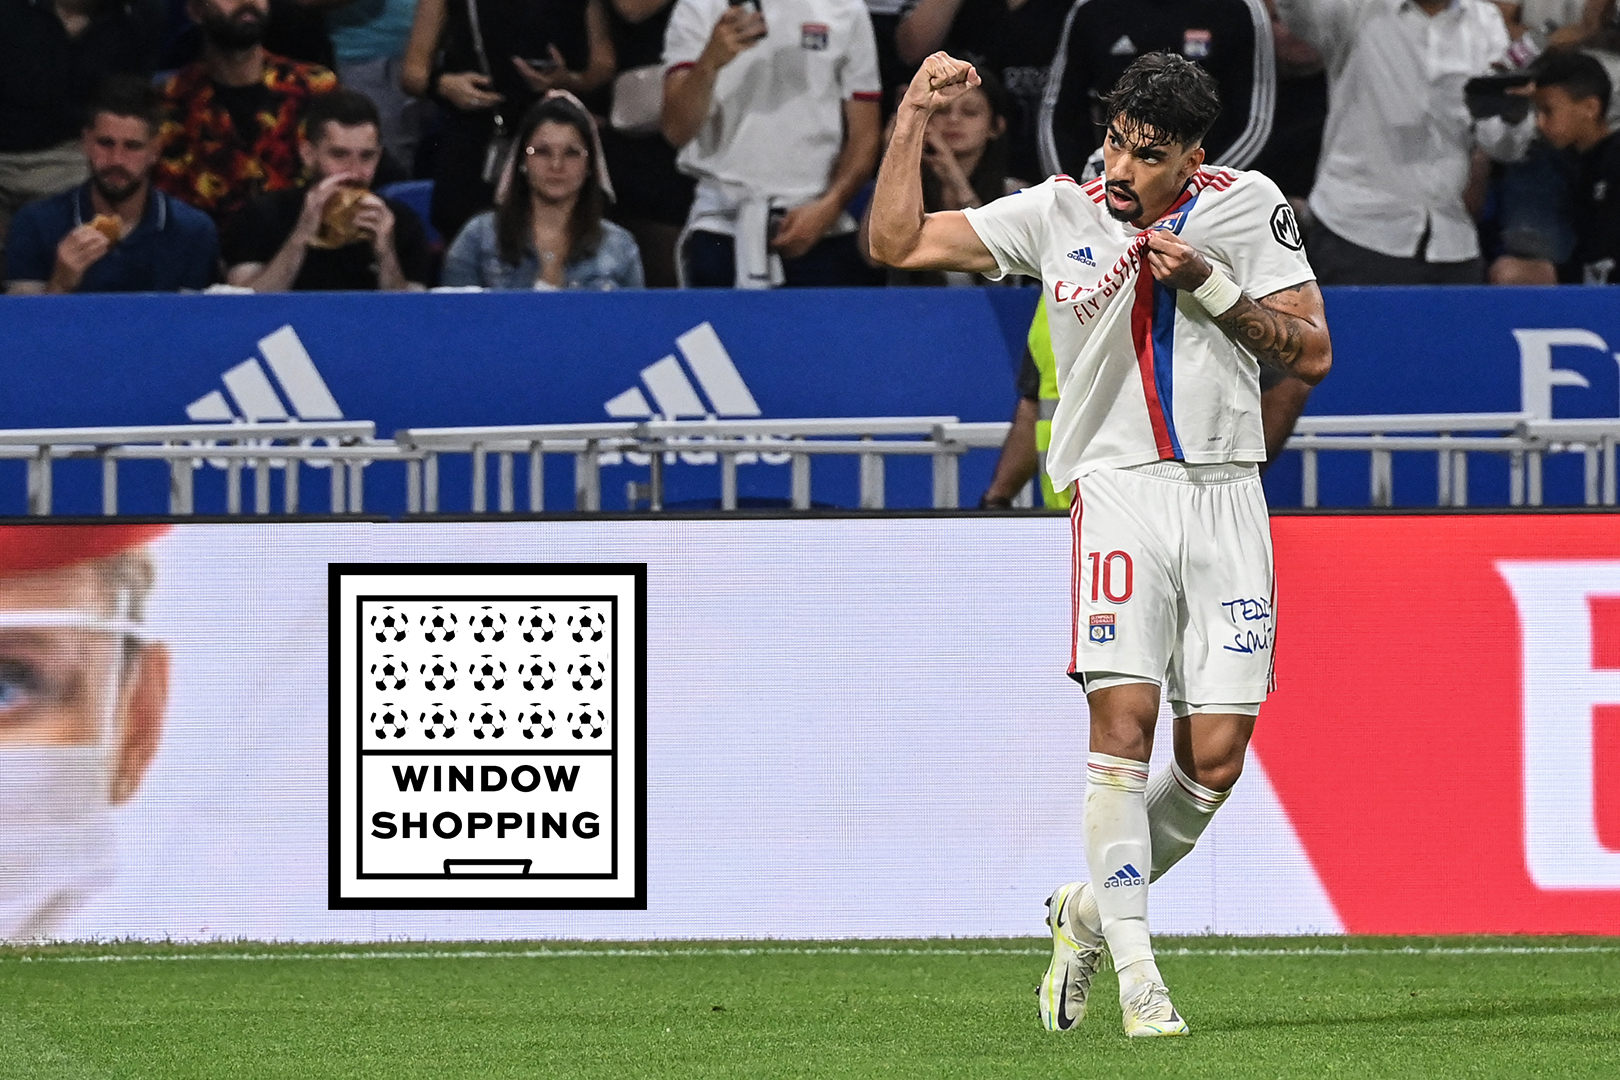 Lyons Brazilian midfielder Lucas Paqueta celebrates during the French L1 football match between Olympique Lyonnais (OL) and FC Nantes at The Groupama Stadium in Decines-Charpieu, central-eastern France on May 14, 2022.